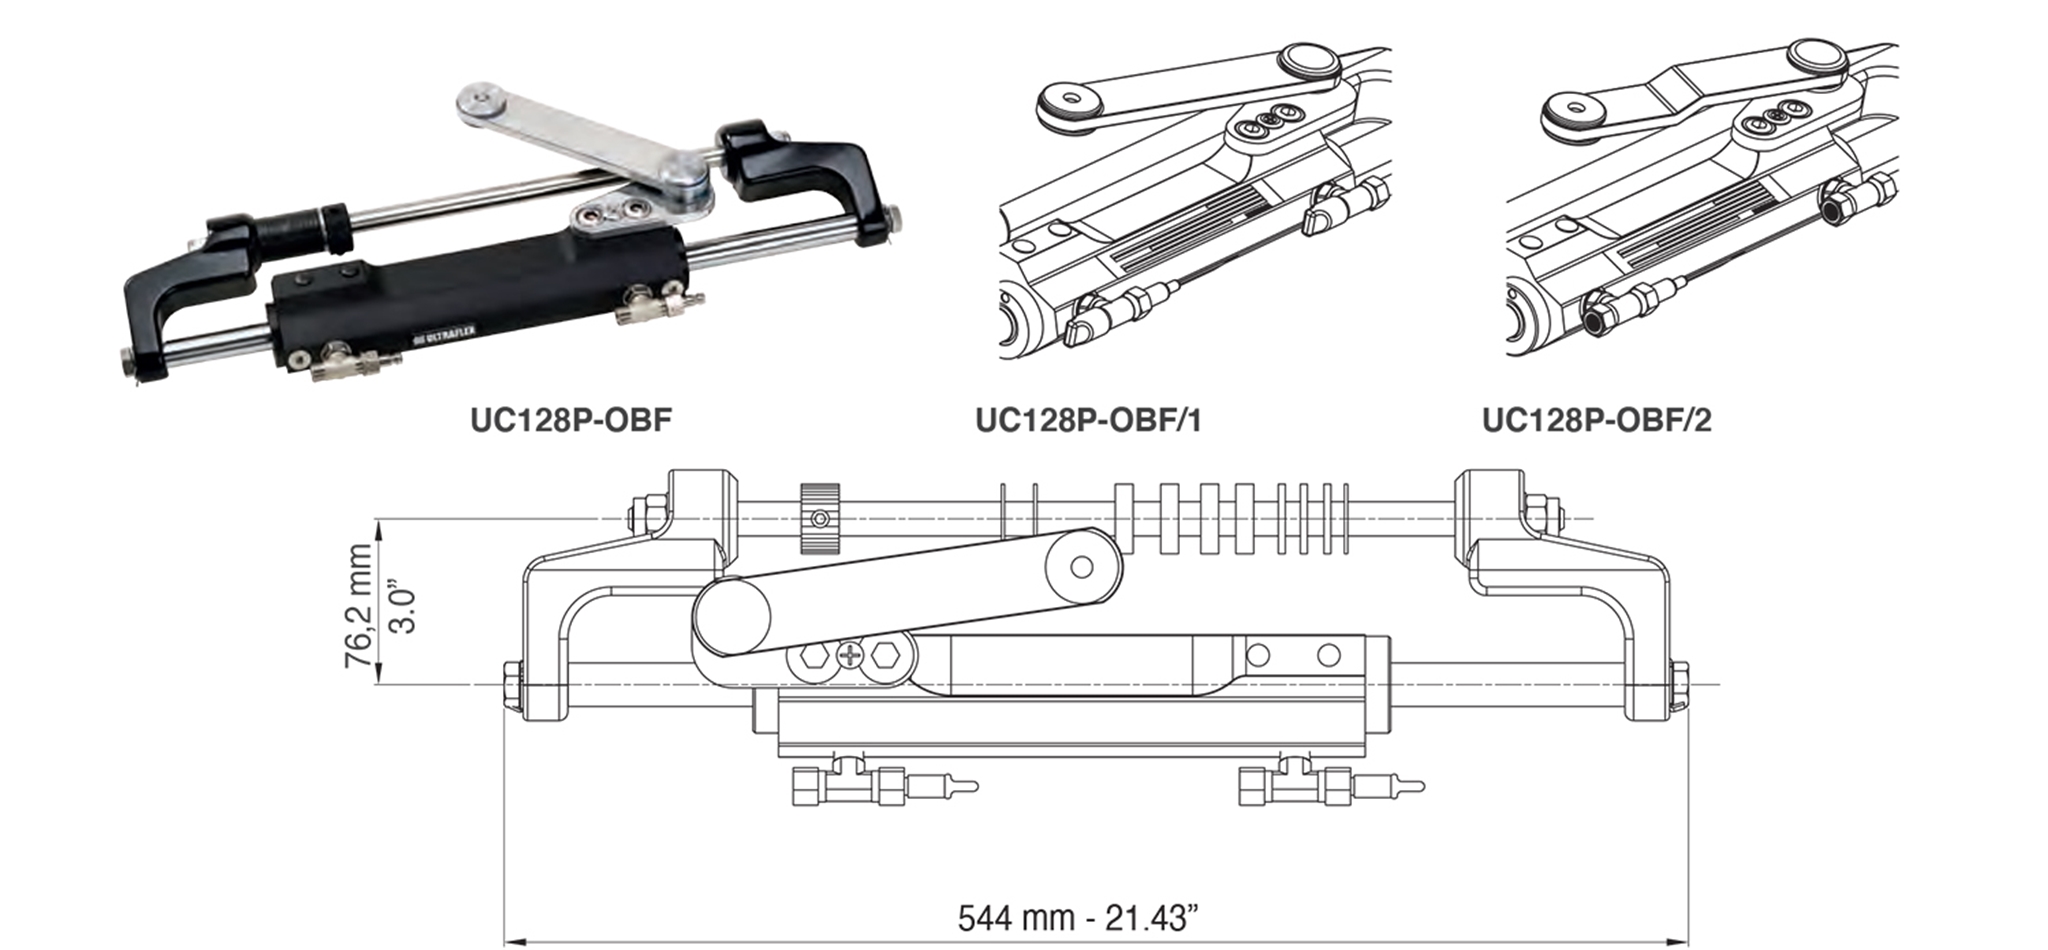 UC128TS Hydraujlic Boat Steering Cylinders Specifications